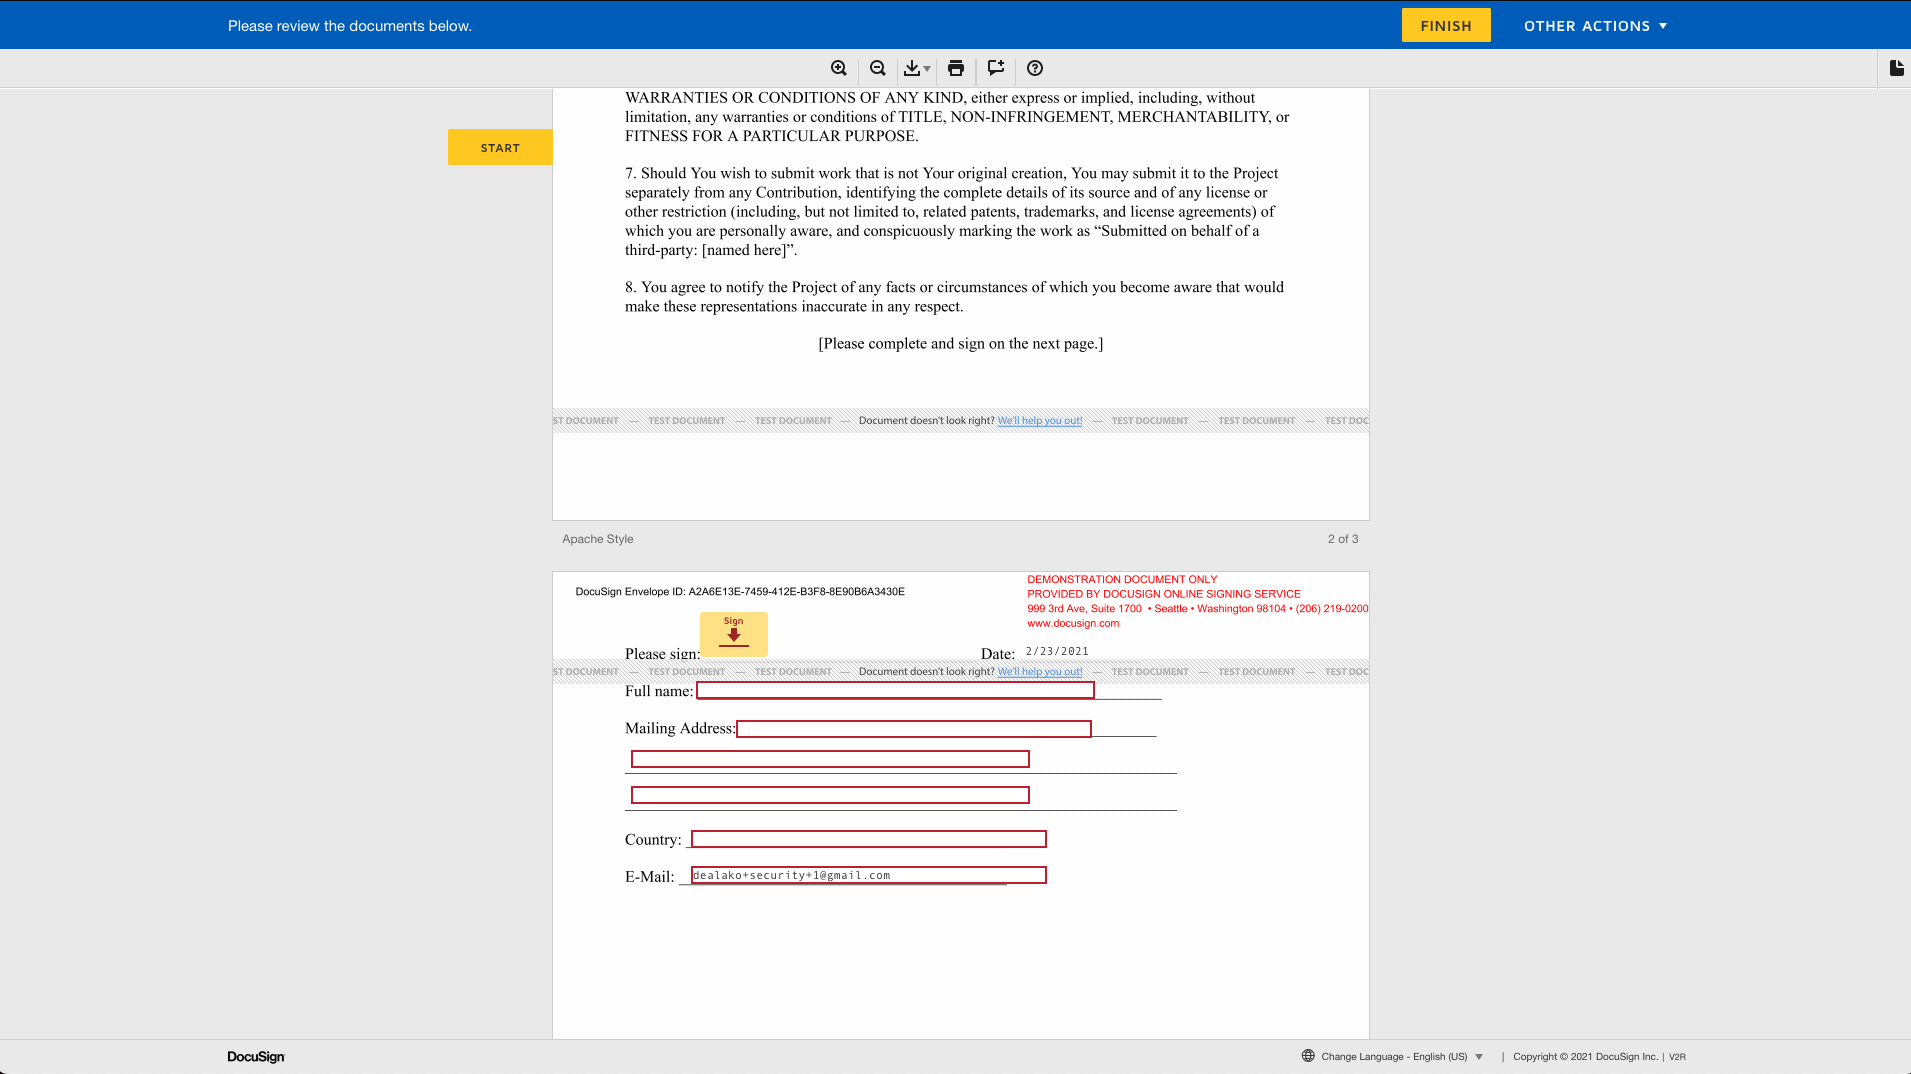 Docusign View 2